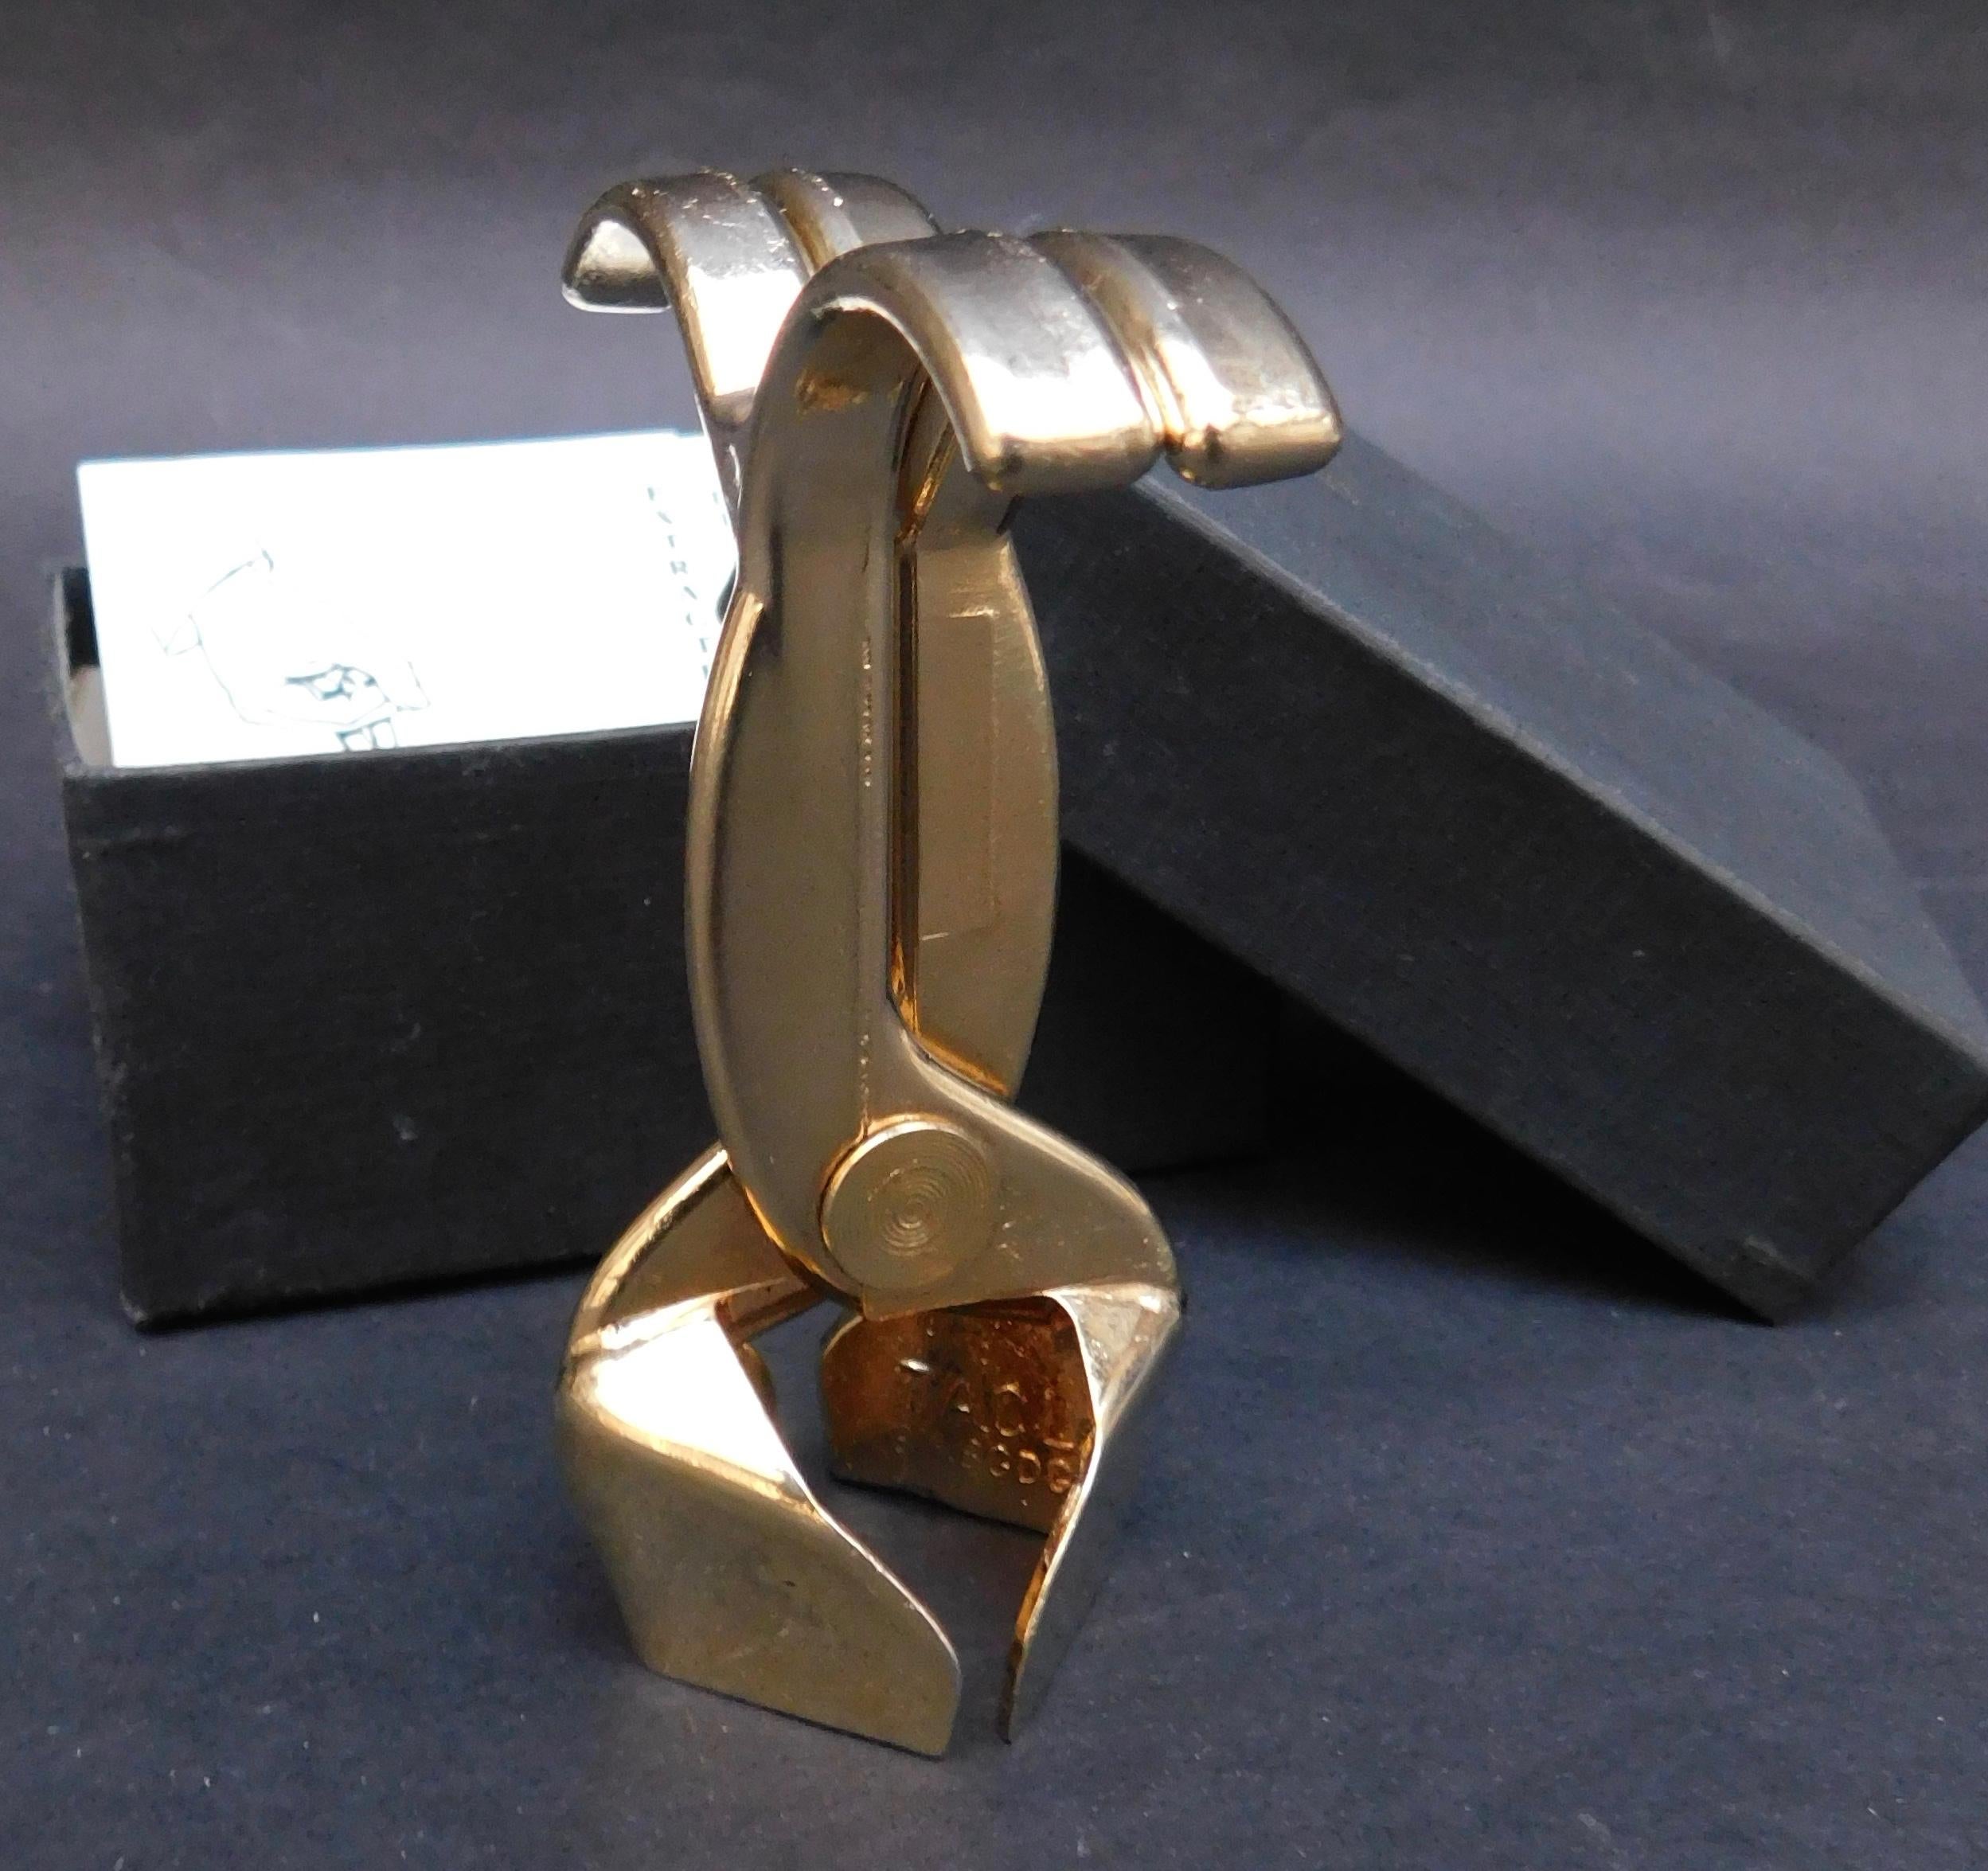 1970s French Champagne bottle opener made by Cado Paris. Used to elegantly grip and pull the champagne cork for a chic presentation every time. 
The perfect gift or bar accessory.
Includes the original box and booklet